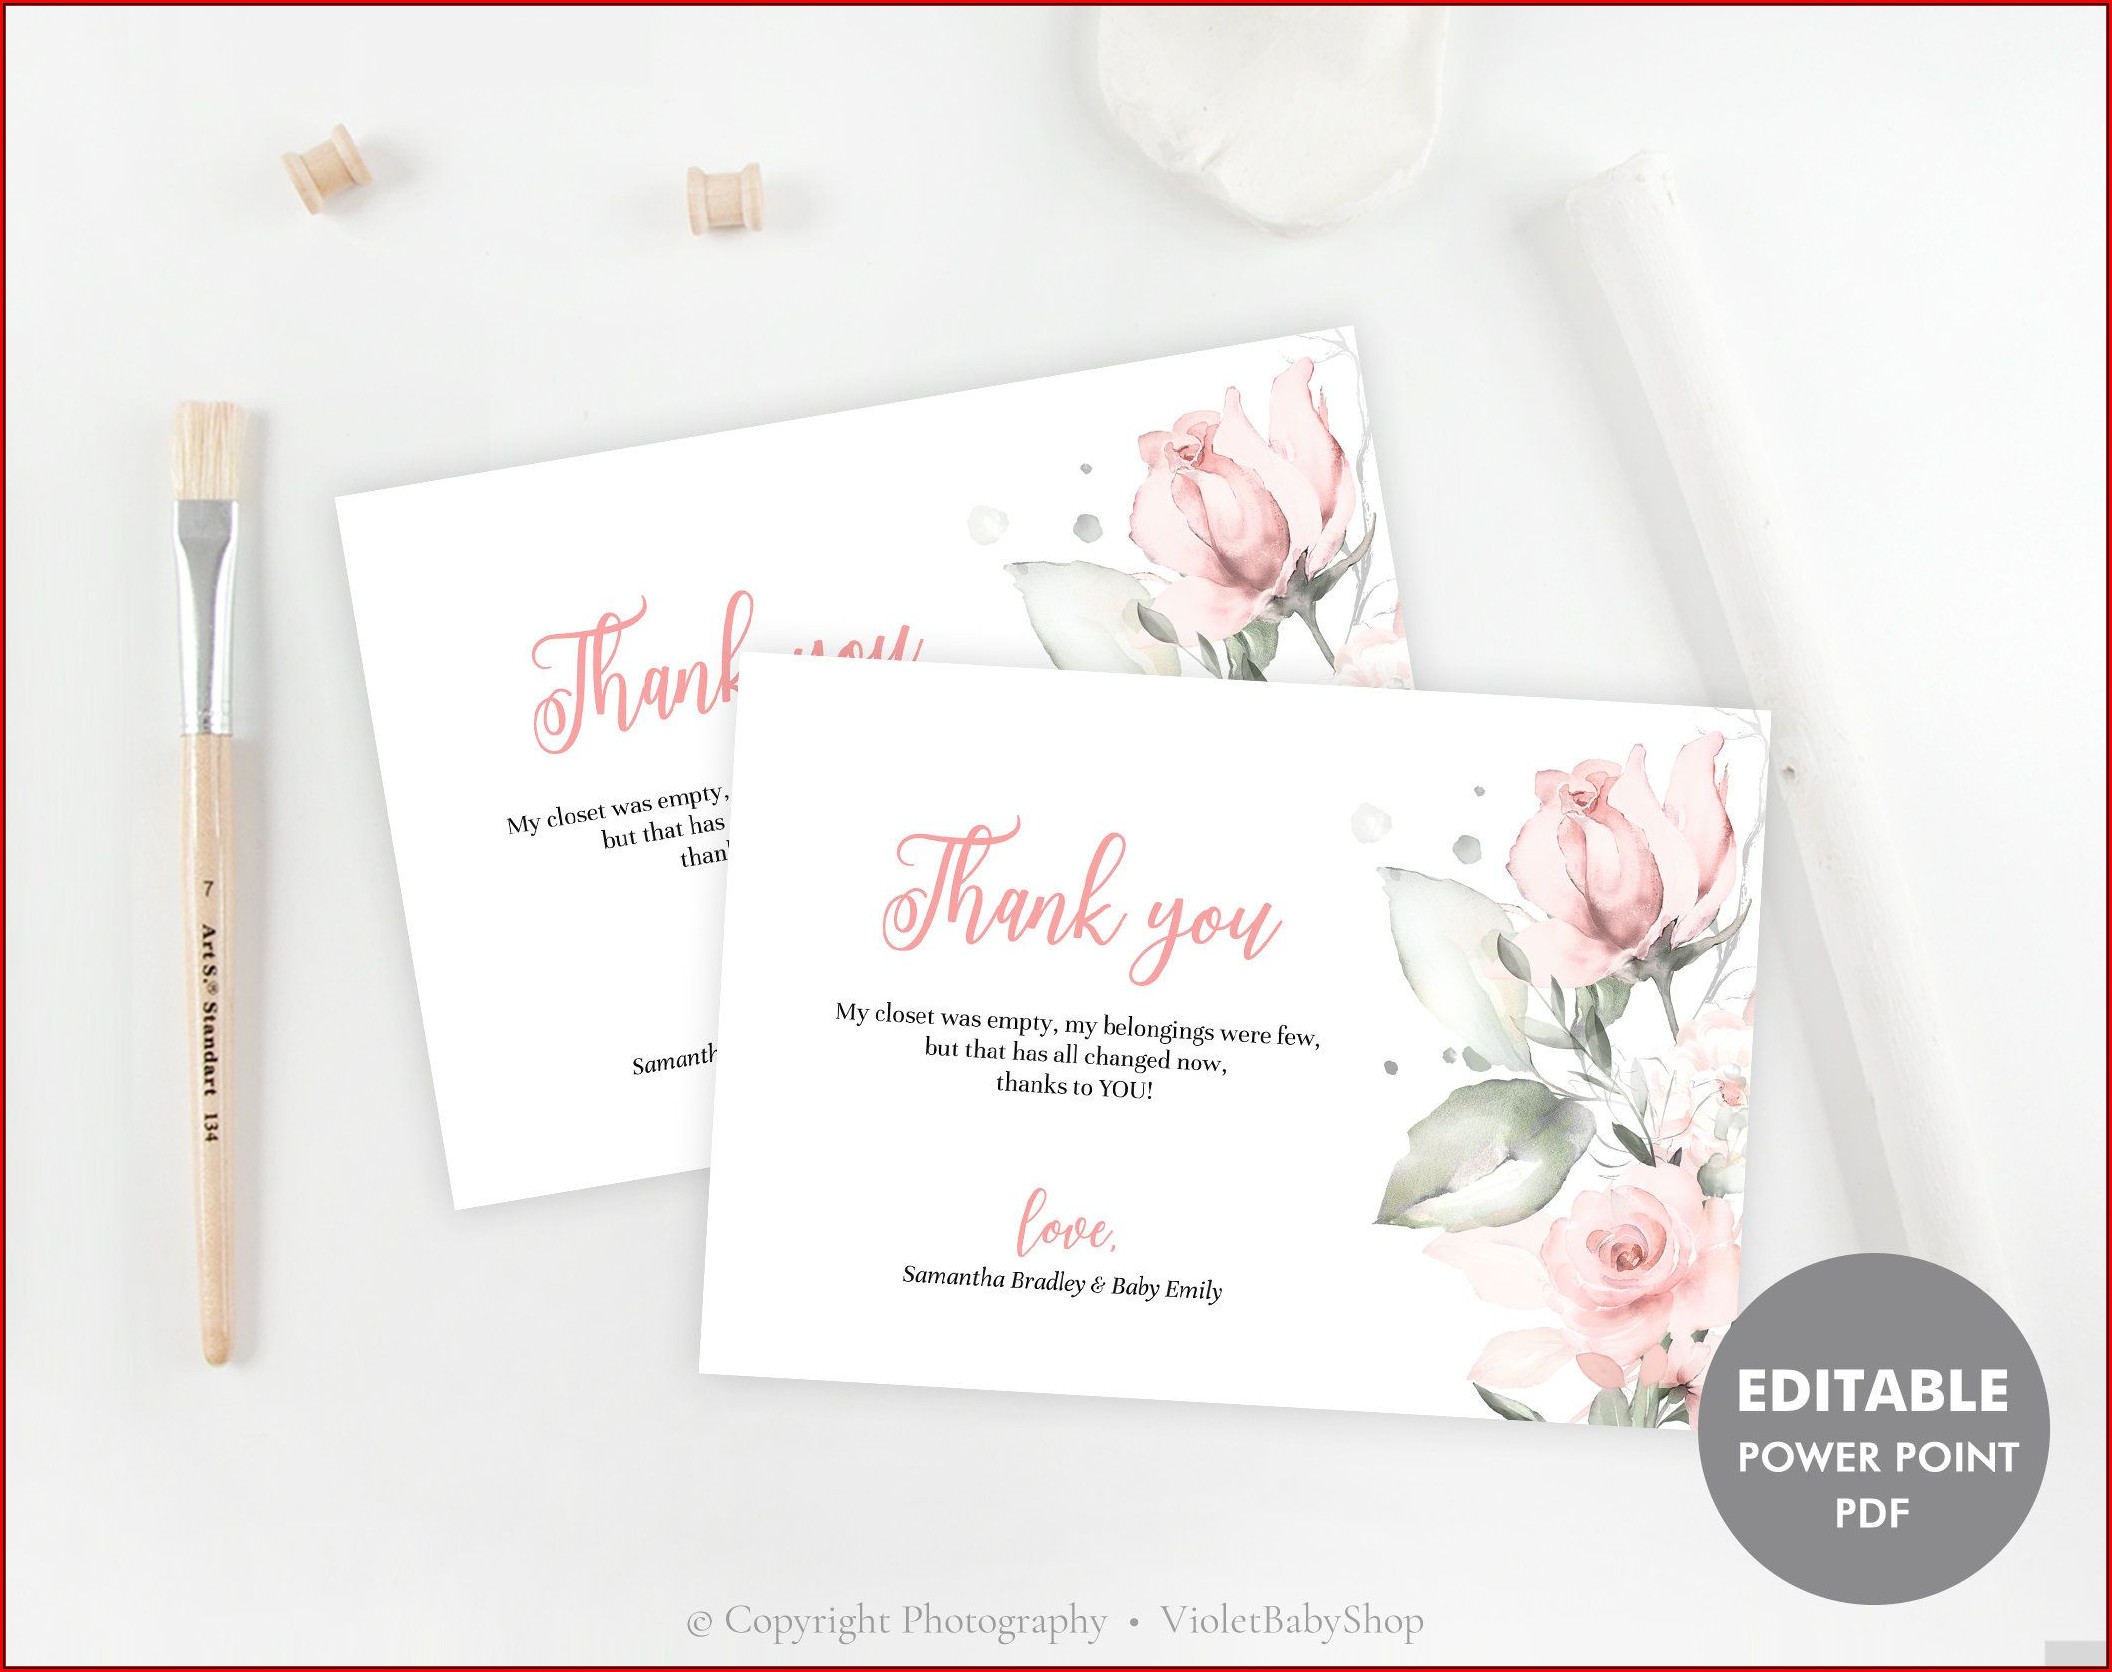 Baby Shower Thank You Card Template